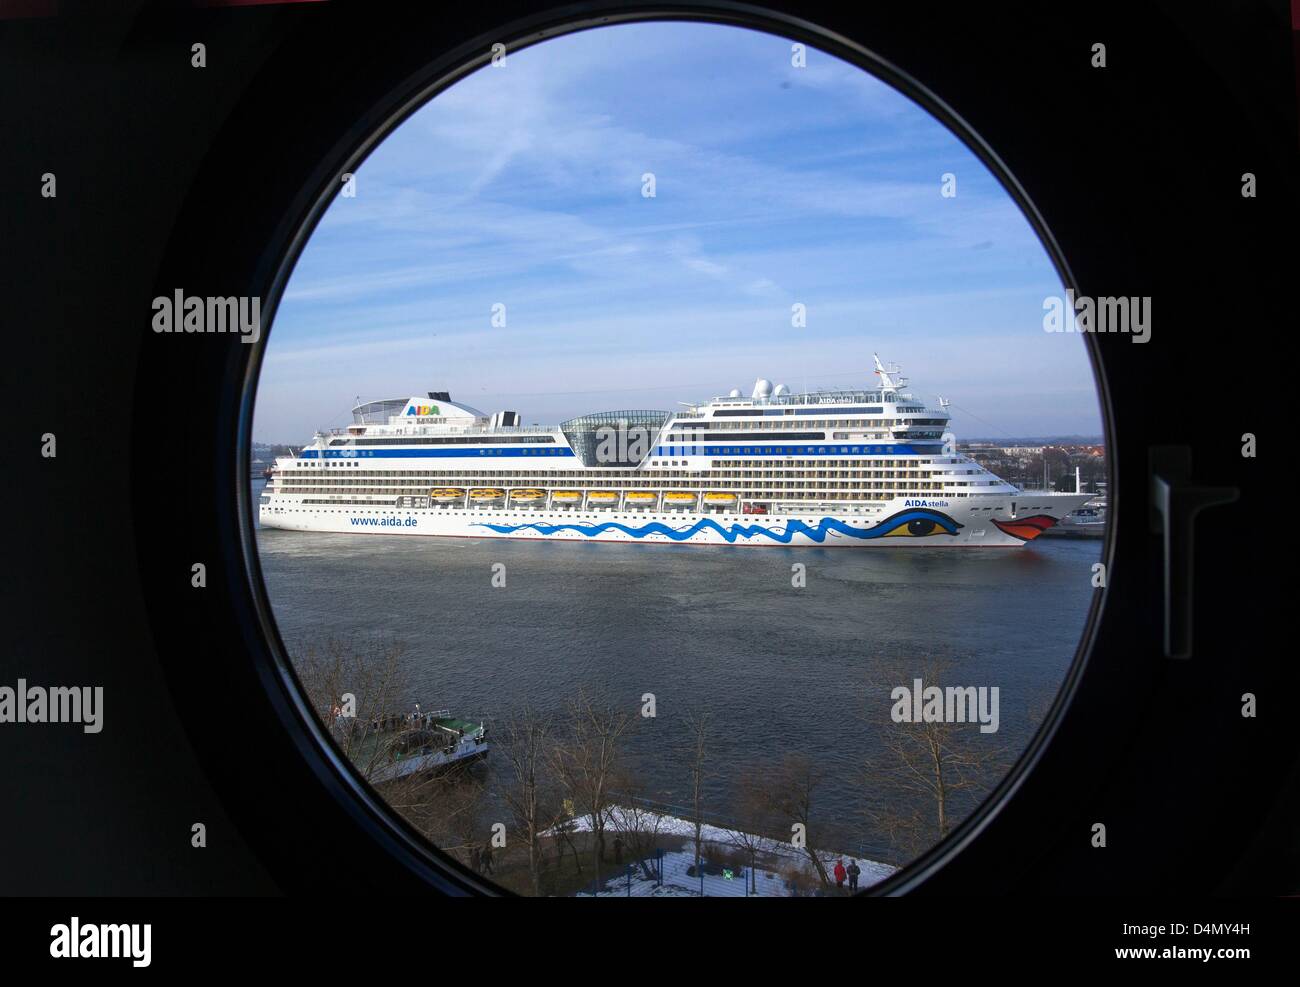 The newly built cruise ship 'AIDAstella' arrives to the port of Rostock, Germany, 16 March 2013. The new 2.200 passenger club ship has 14 decks and equals her sister ships AIDAblu, AIDAsol and AIDAmar also in respect to size. Photo: Jens Buettner Stock Photo